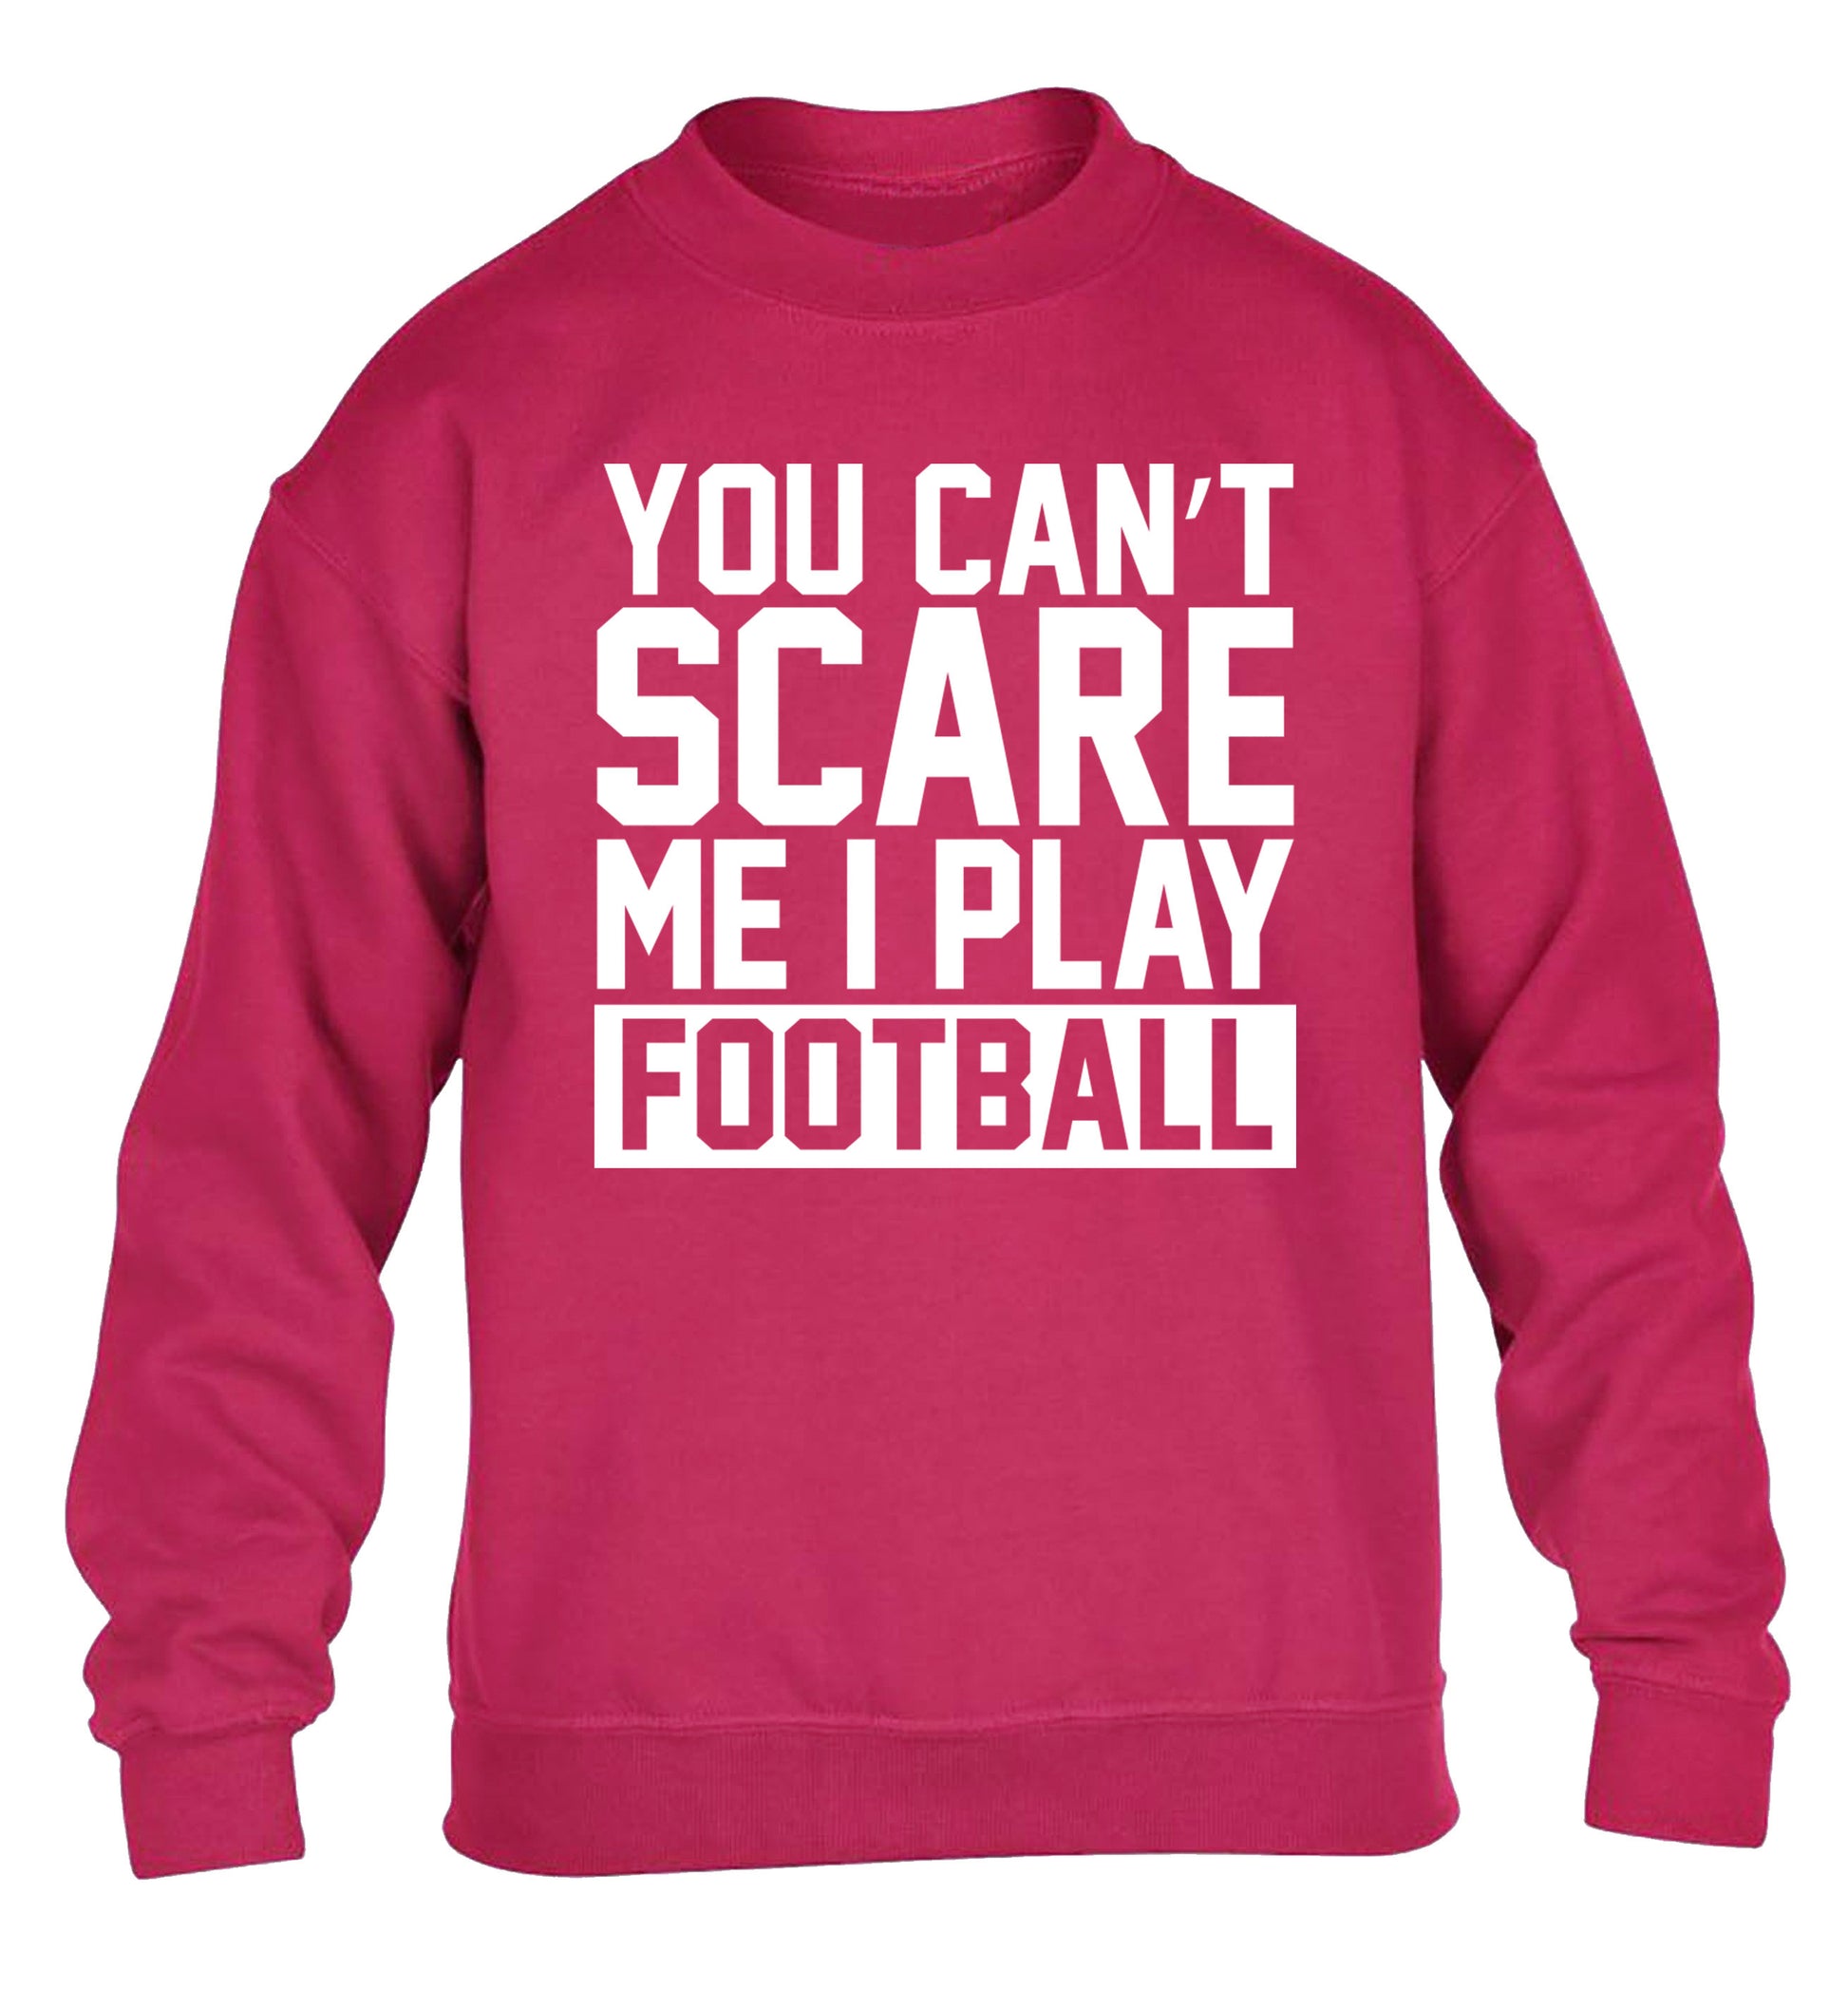 You can't scare me I play football children's pink sweater 12-14 Years